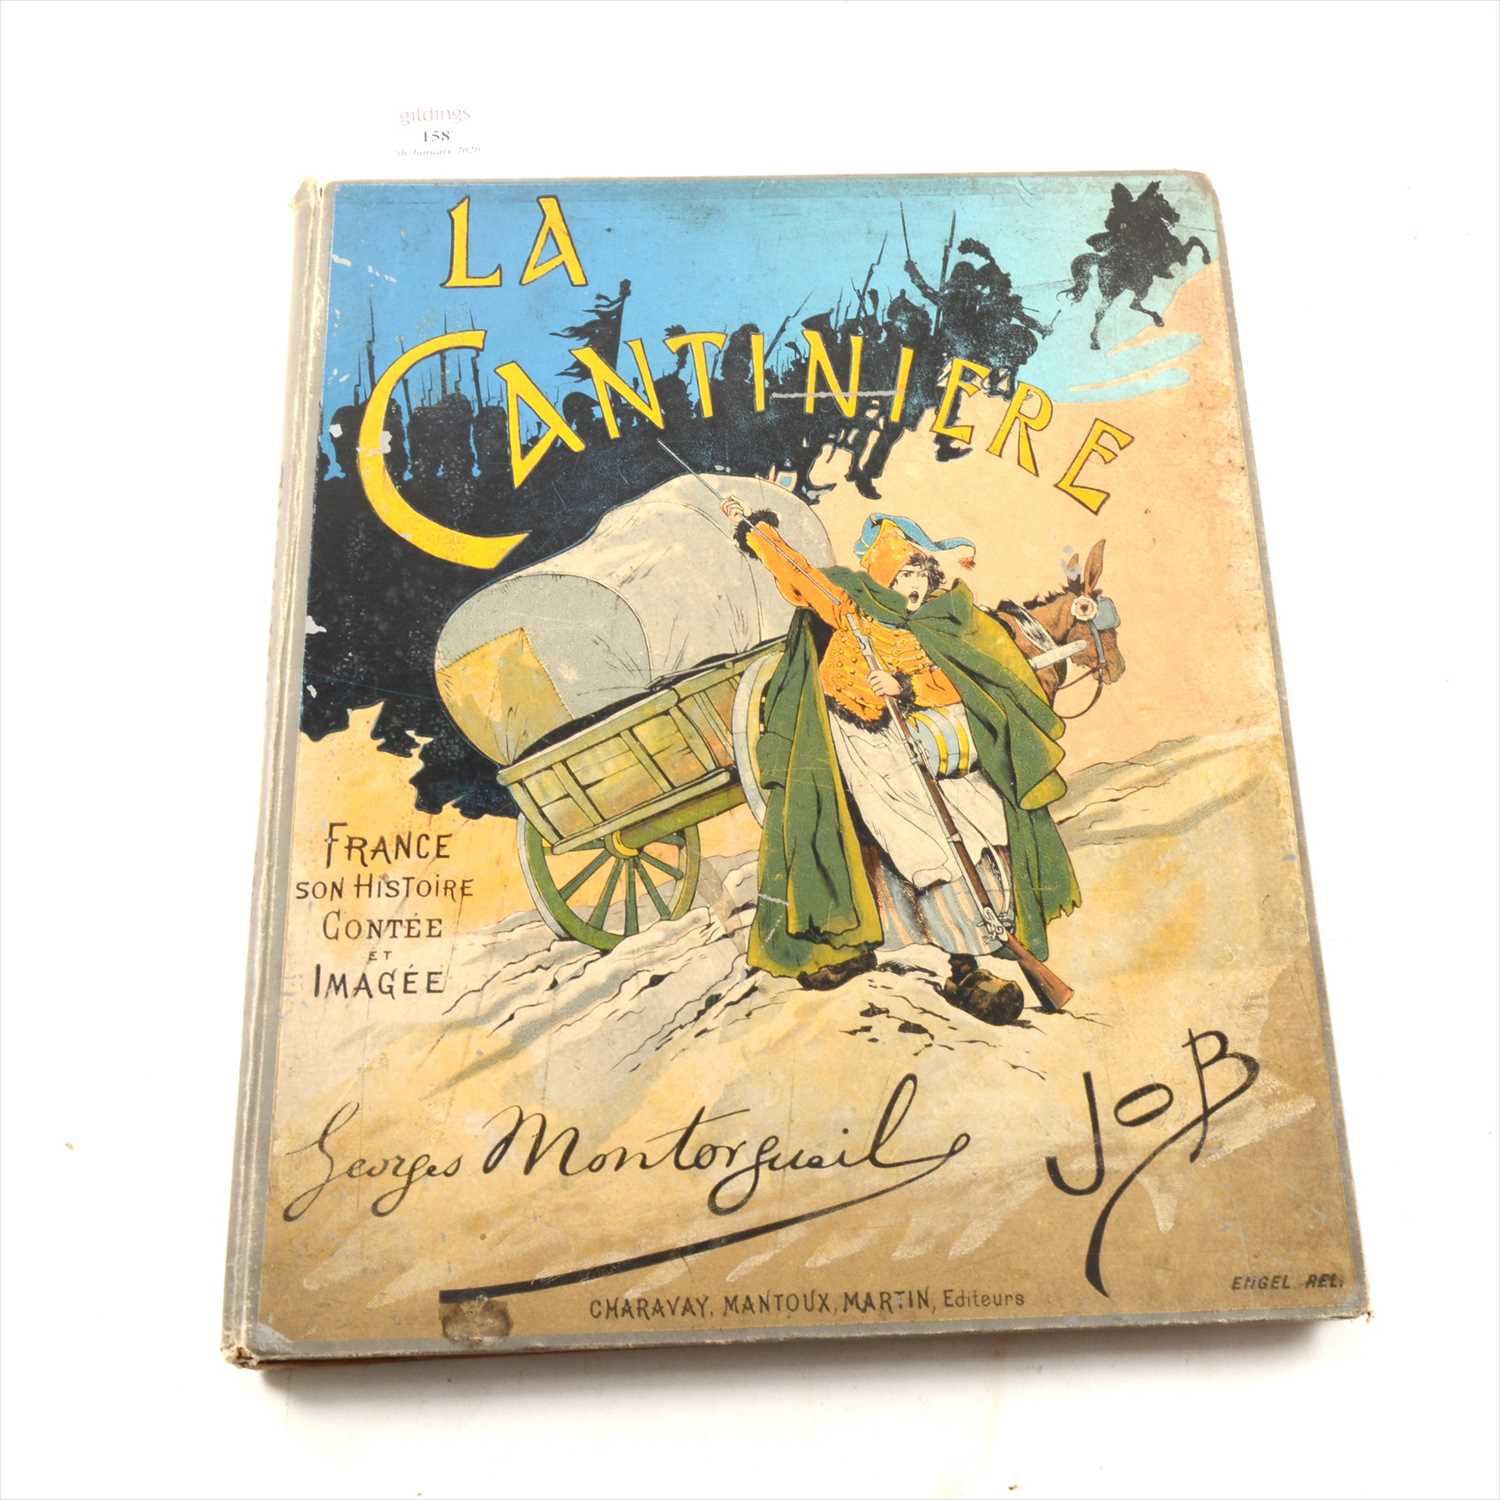 Lot 52 - Georges Montorgueil, La Cantiniere, illustrated by Job